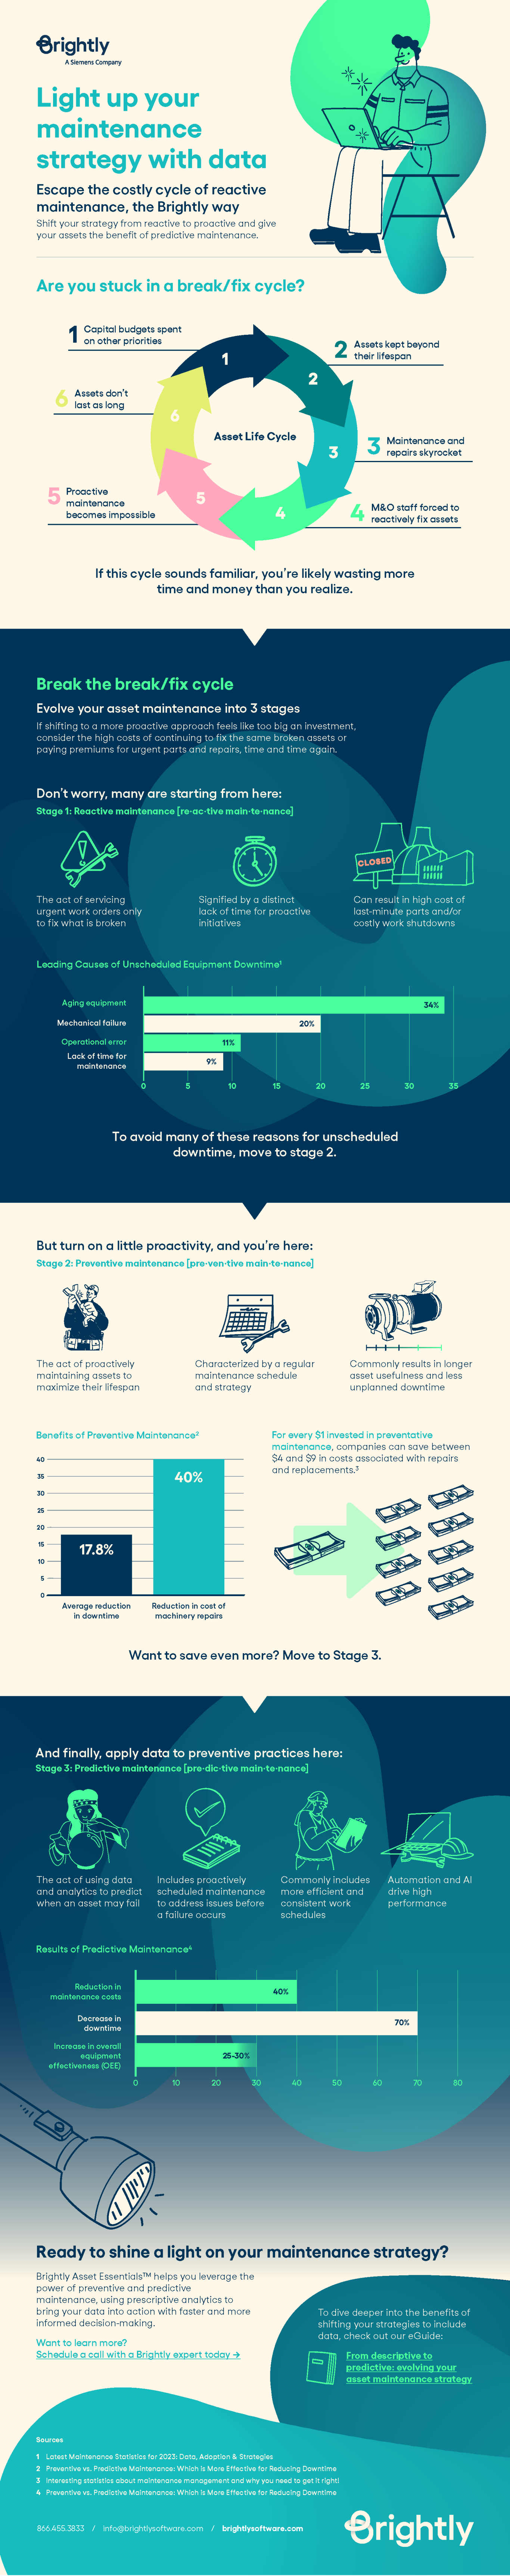 Brightly - Infographic - Maintenance Strategy with Data